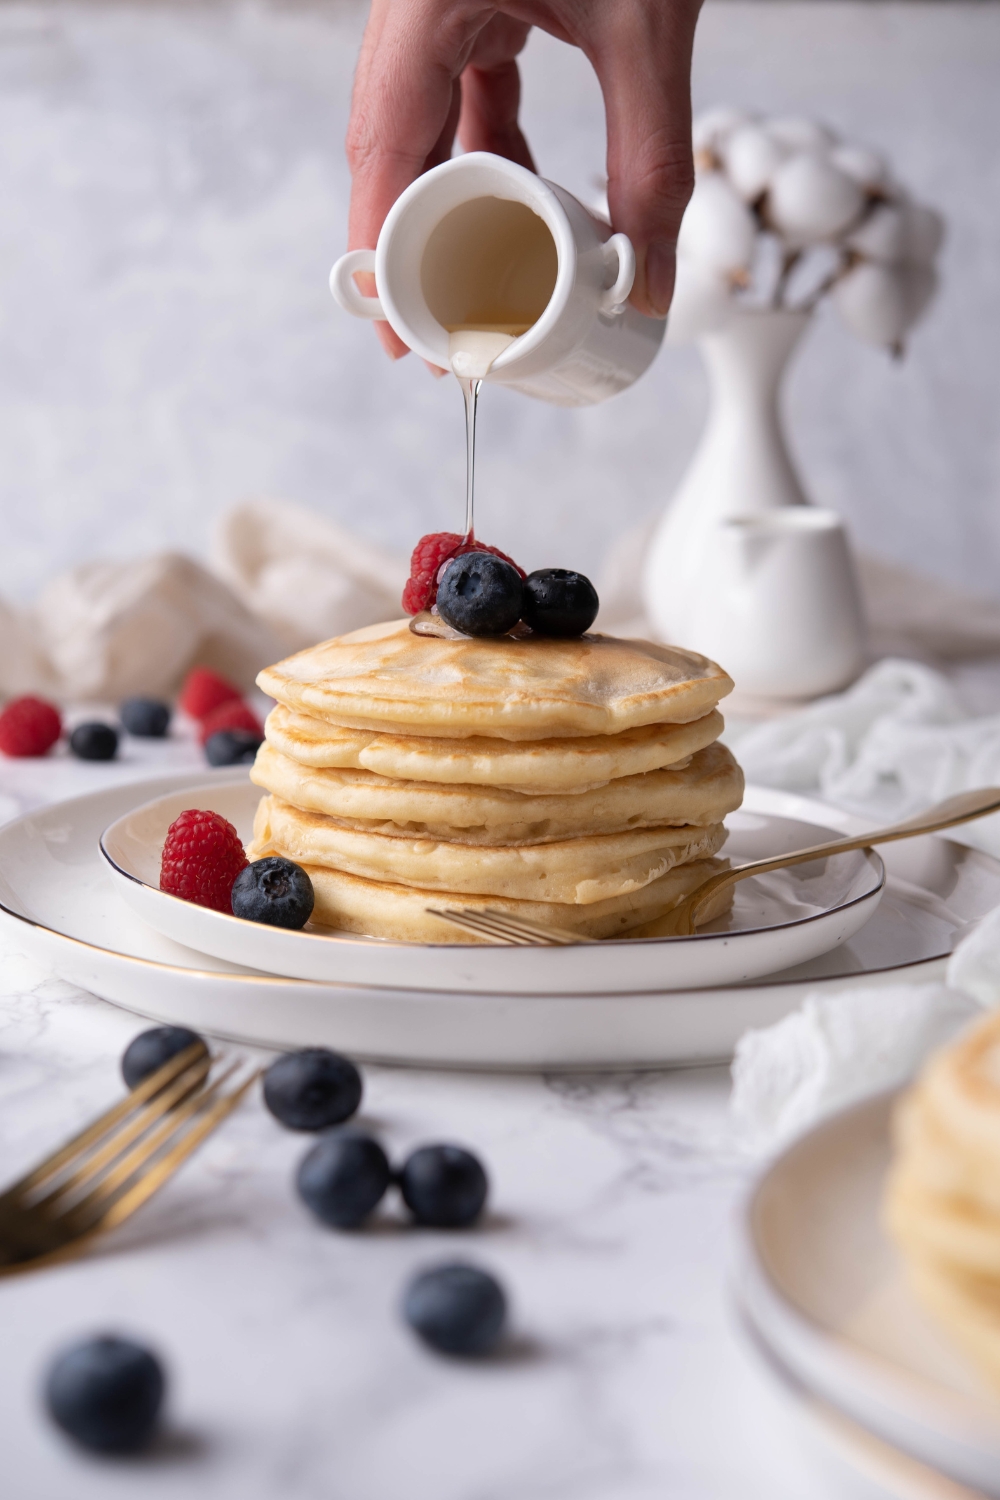 A stack of pancakes being drizzled with maple syrup and garnished with fresh berries on a plate.